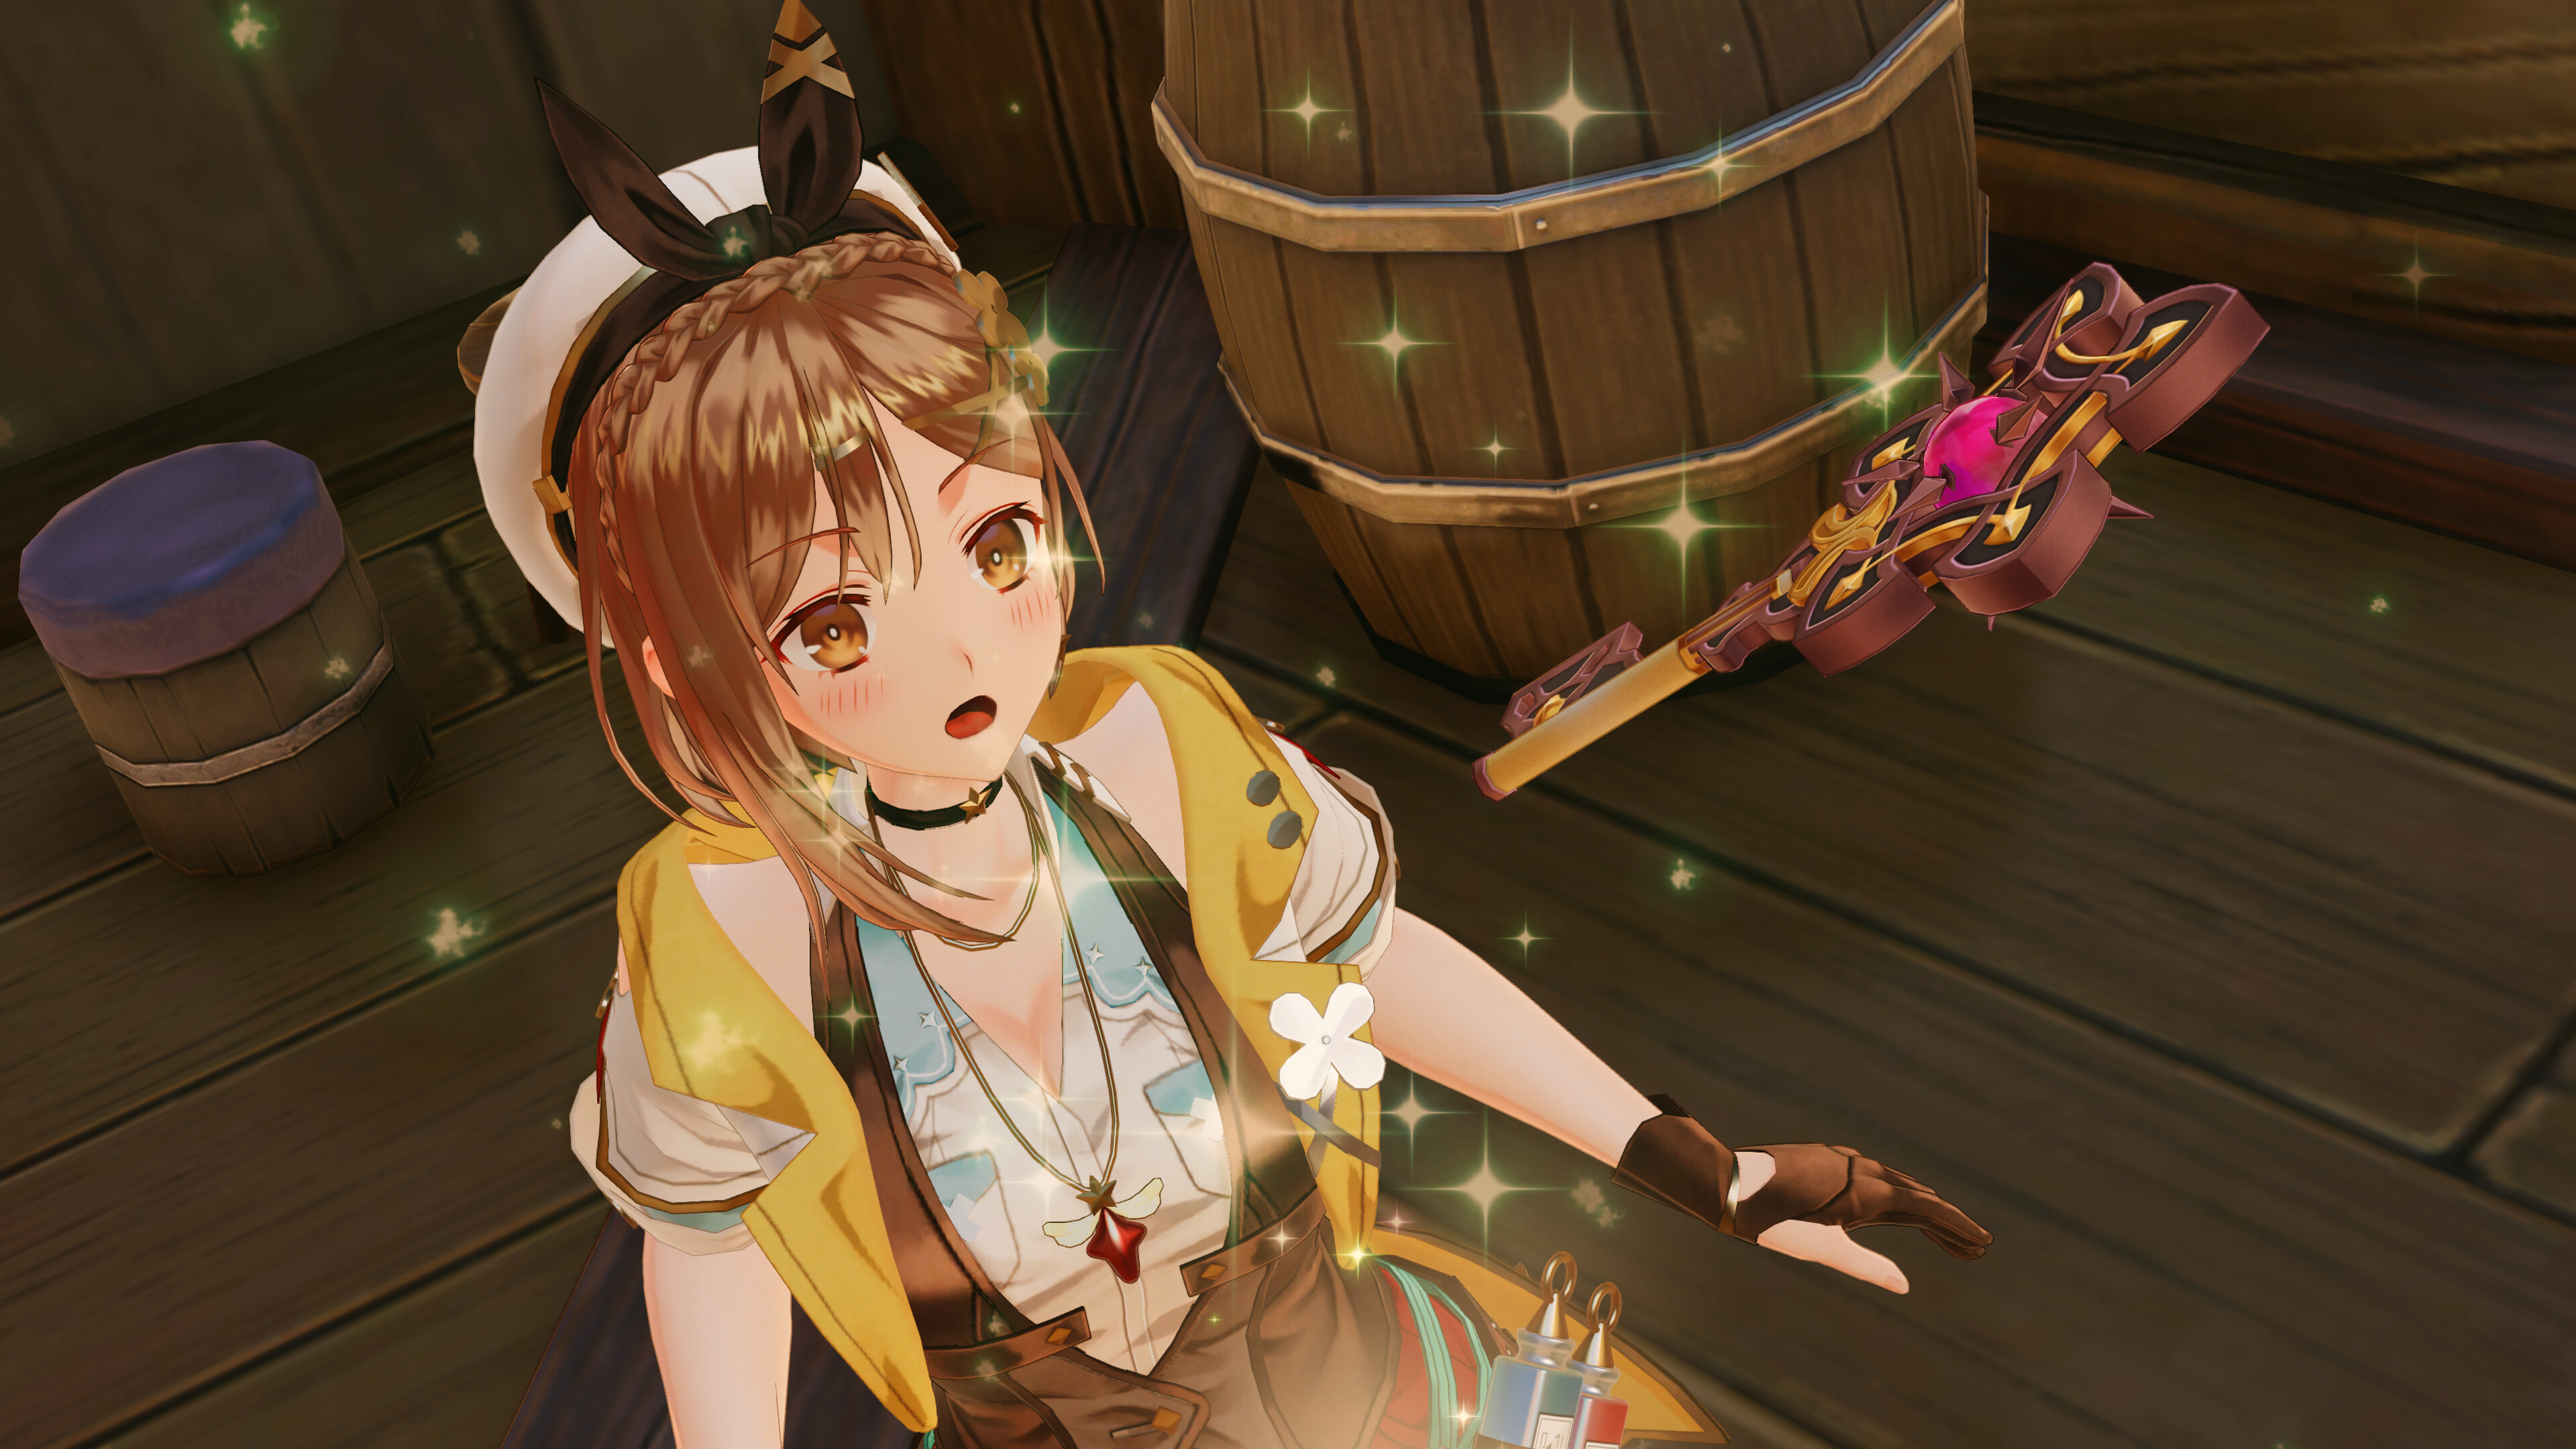 atelier ryza 3 interview characters ending 1